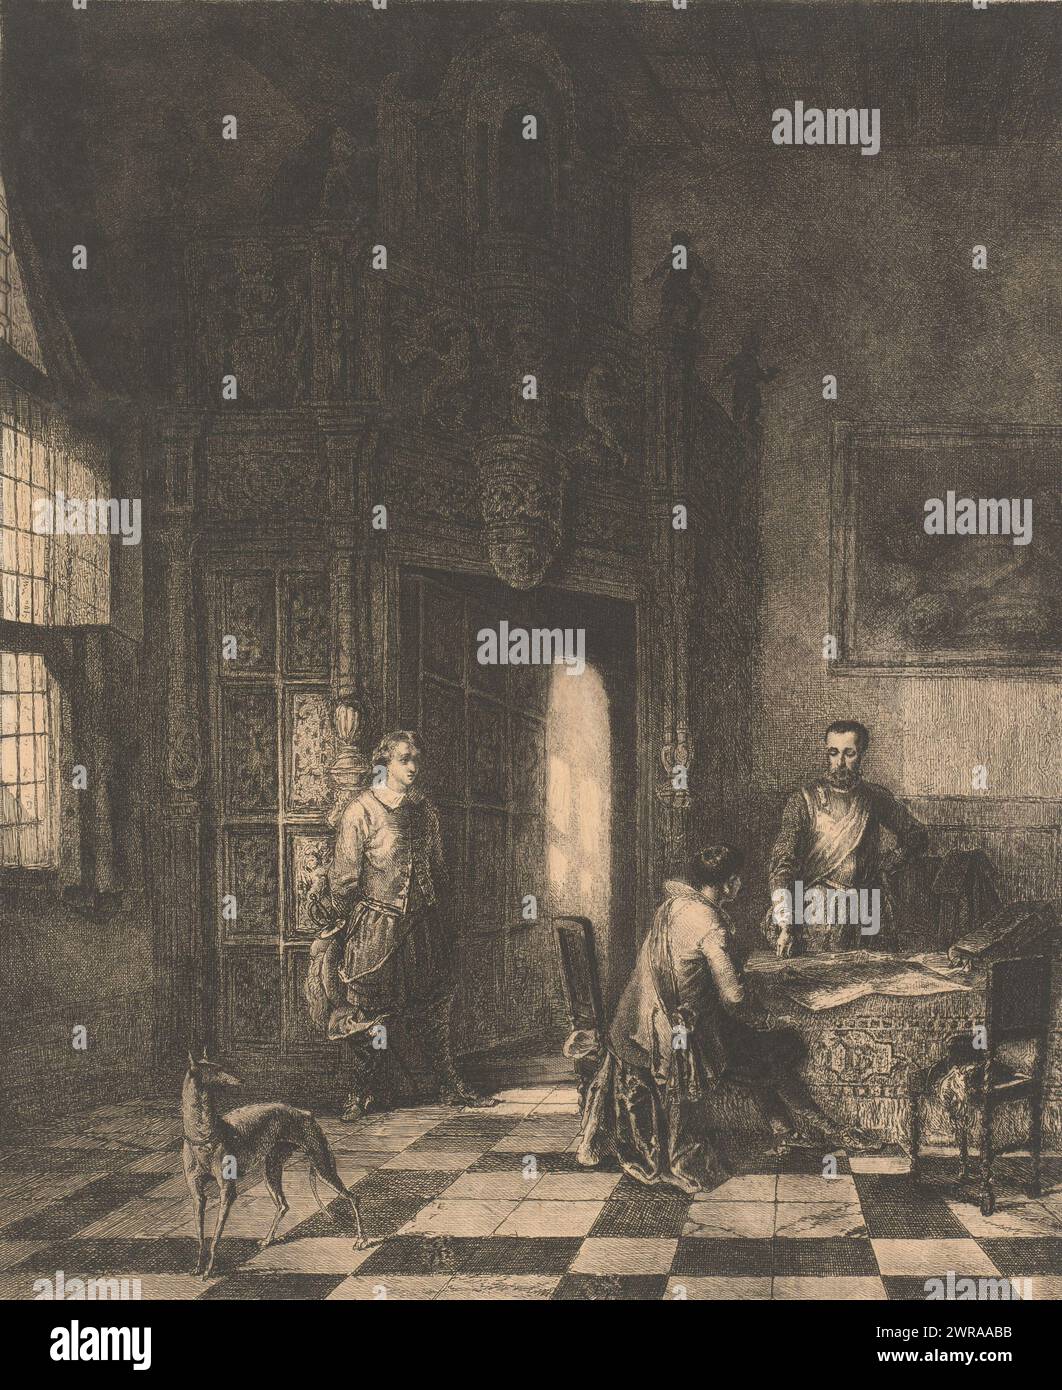 Three men and a dog in the aldermen's hall in the town hall of Oudenaarde, print maker: Guillaume Joseph Vertommen, (attributed to), after painting by: Alexandre Louis Lion, 1825 - 1863, paper, etching, height 377 mm × width 299 mm, print Stock Photo